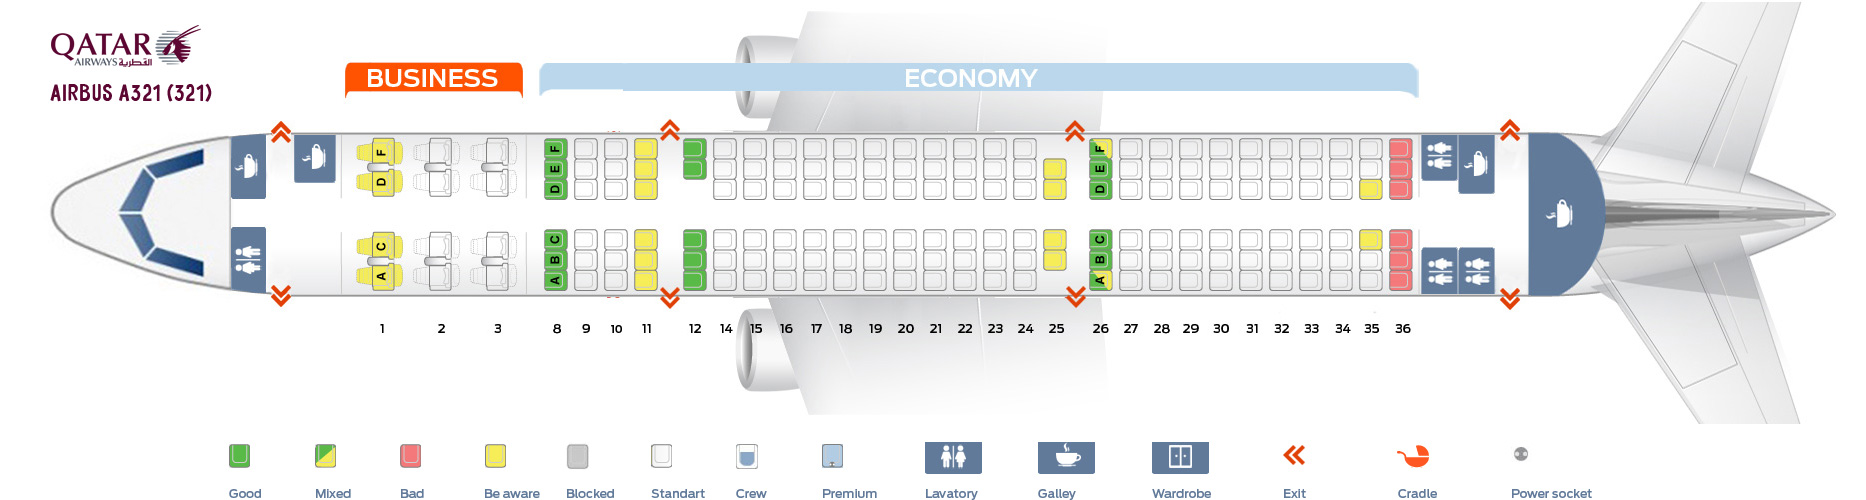 Seat map Airbus A321200 Qatar Airways. Best seats in the